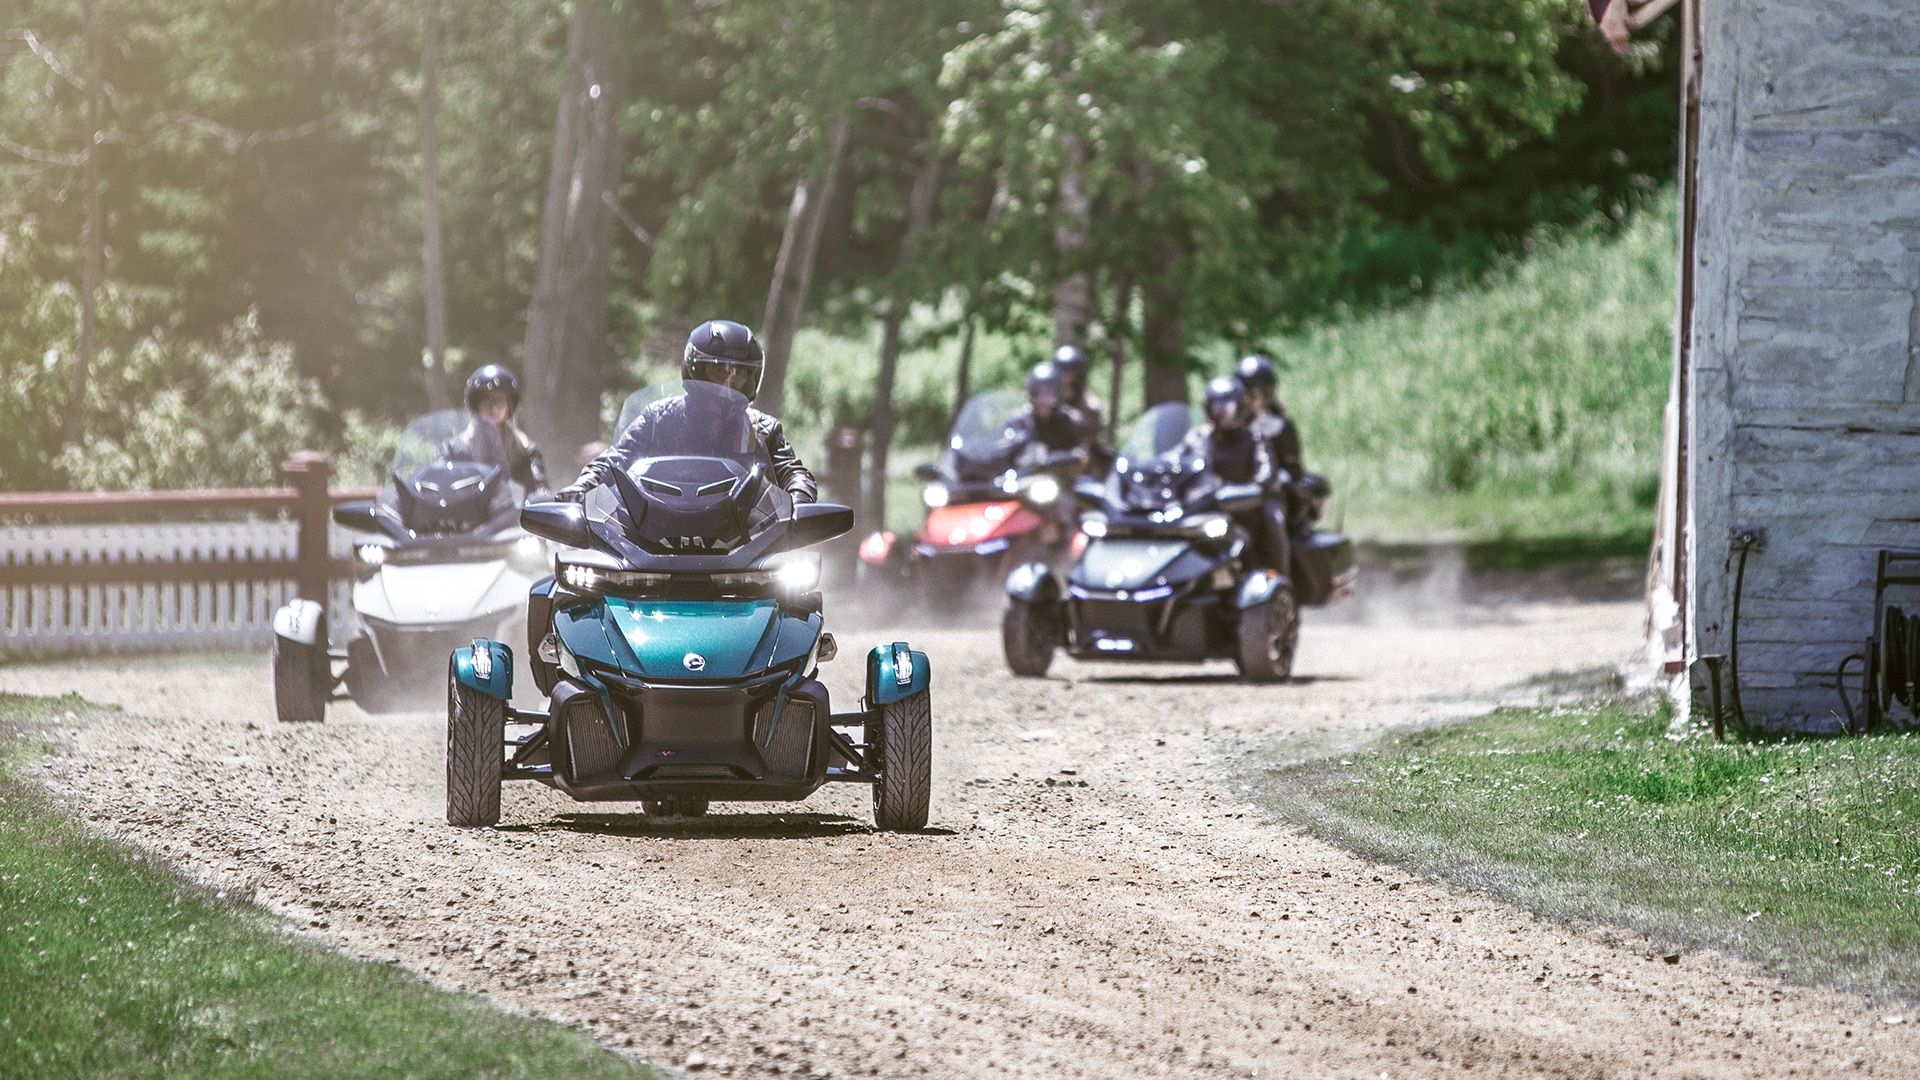 A pack of four Can-Am Spyder RTs riding in a group formation